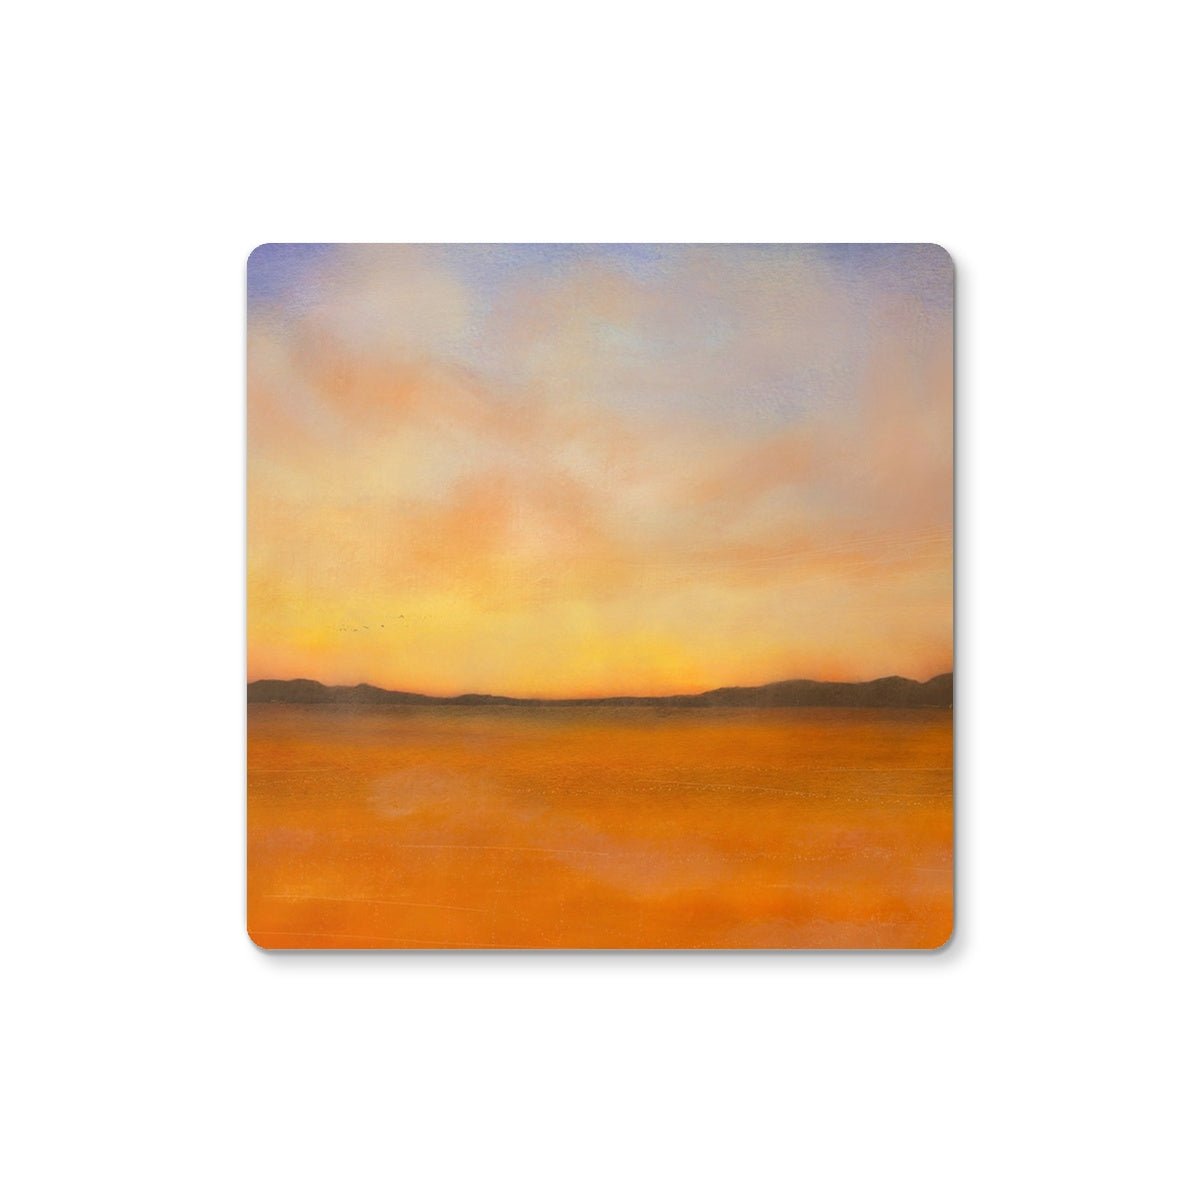 Islay Dawn Art Gifts Coaster-Coasters-Hebridean Islands Art Gallery-6 Coasters-Paintings, Prints, Homeware, Art Gifts From Scotland By Scottish Artist Kevin Hunter